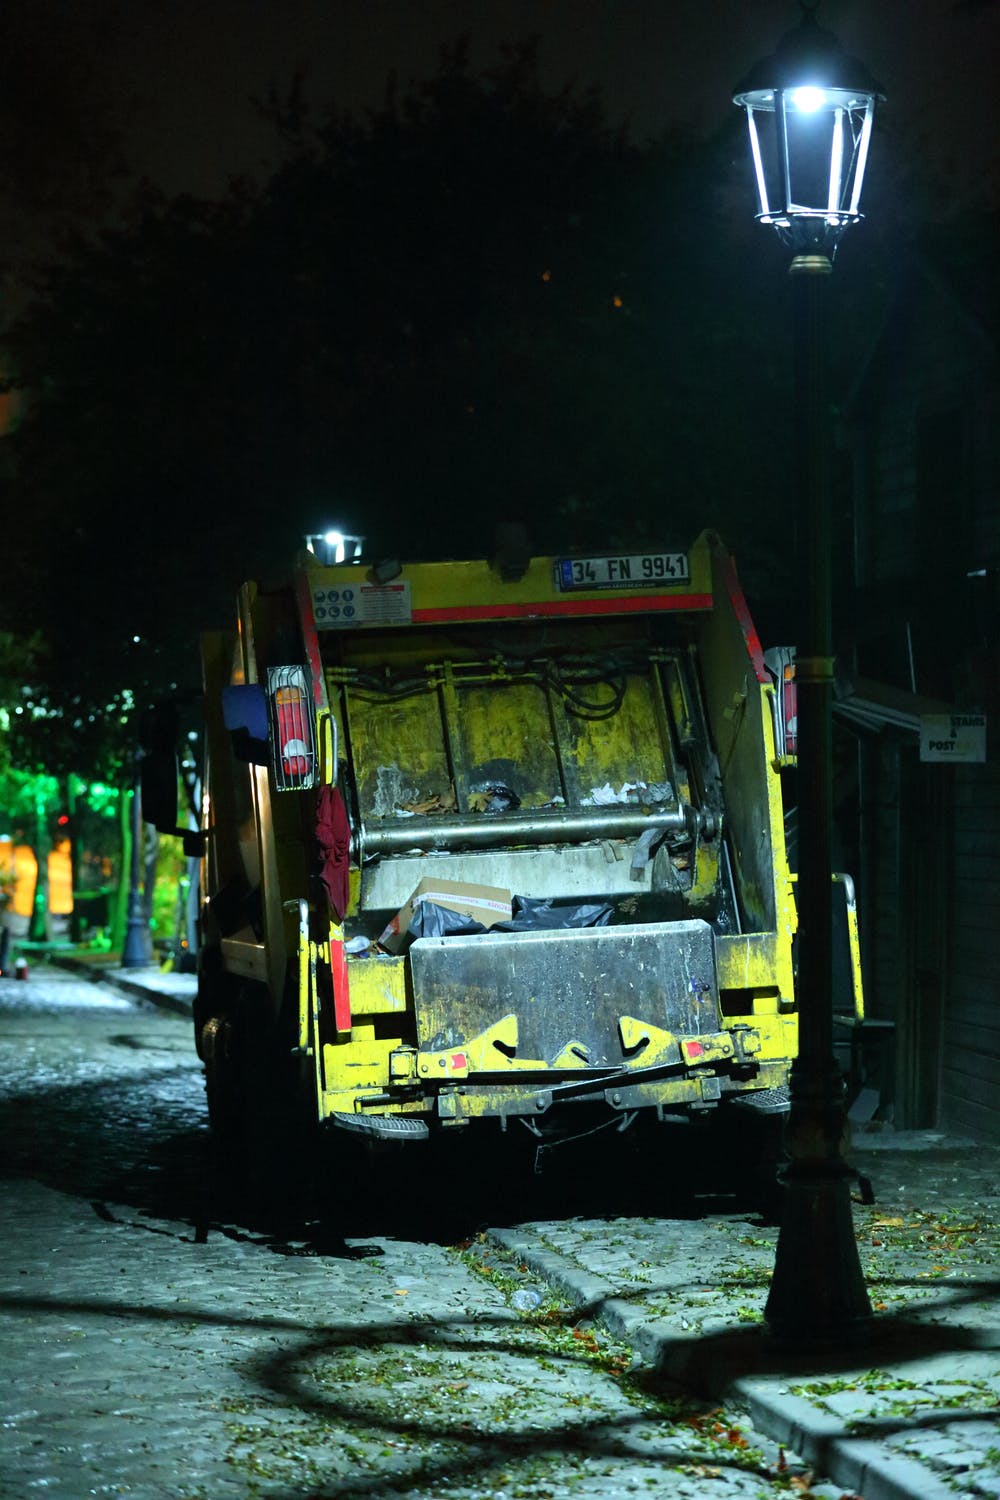 Every morning before dawn Tim and his colleague went from house to house collecting the garbage | Source: Pexels